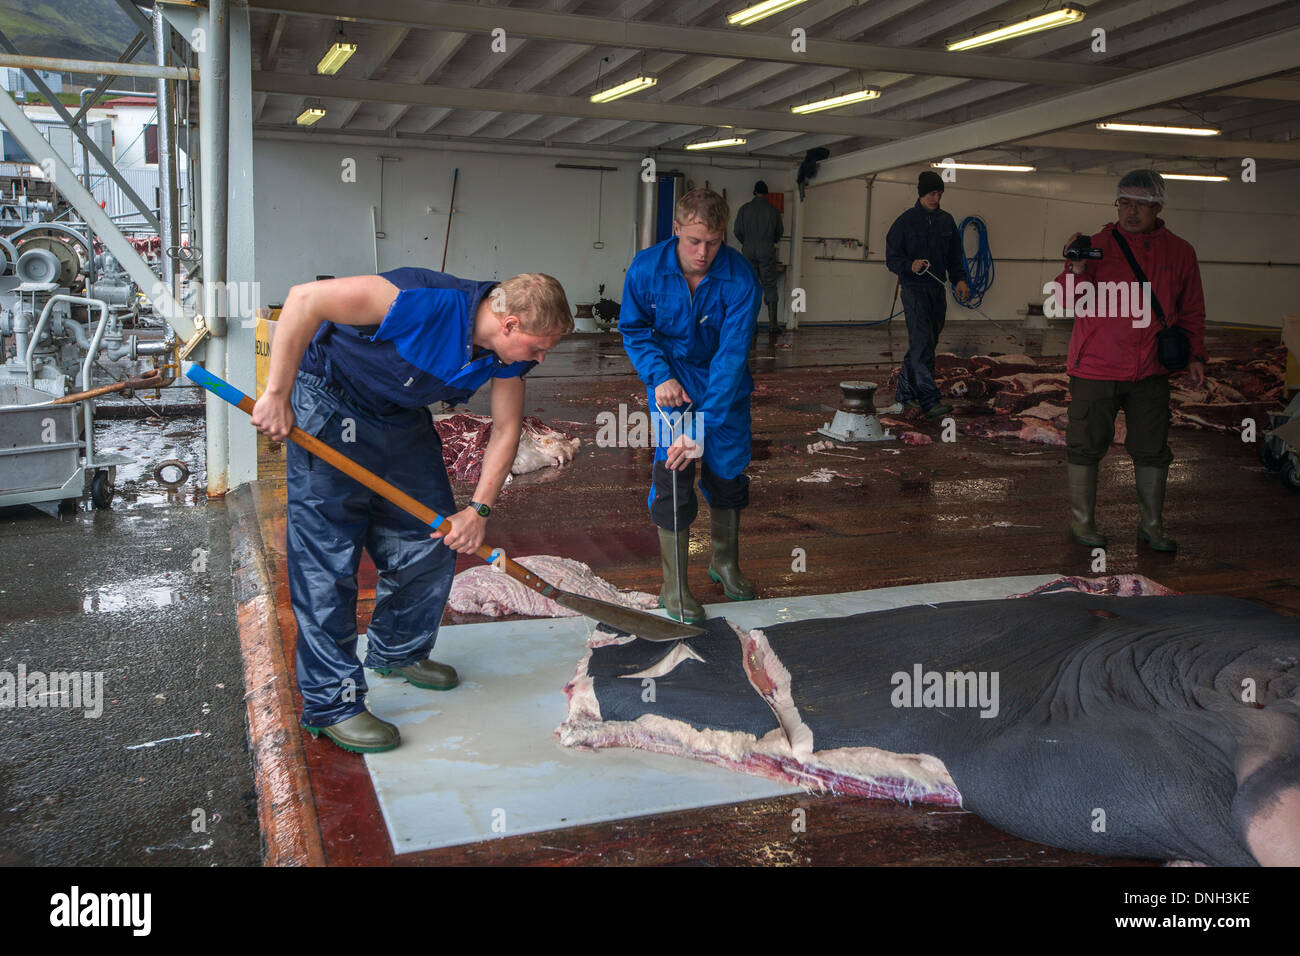 CUTTING UP OF FINBACK WHALES AT THE SEASIDE RESORT OF HVALFJORDUR, THE FJORD OF WHALES, WHALE HUNTING IN ICELAND, WESTERN ICELAND, EUROPE Stock Photo